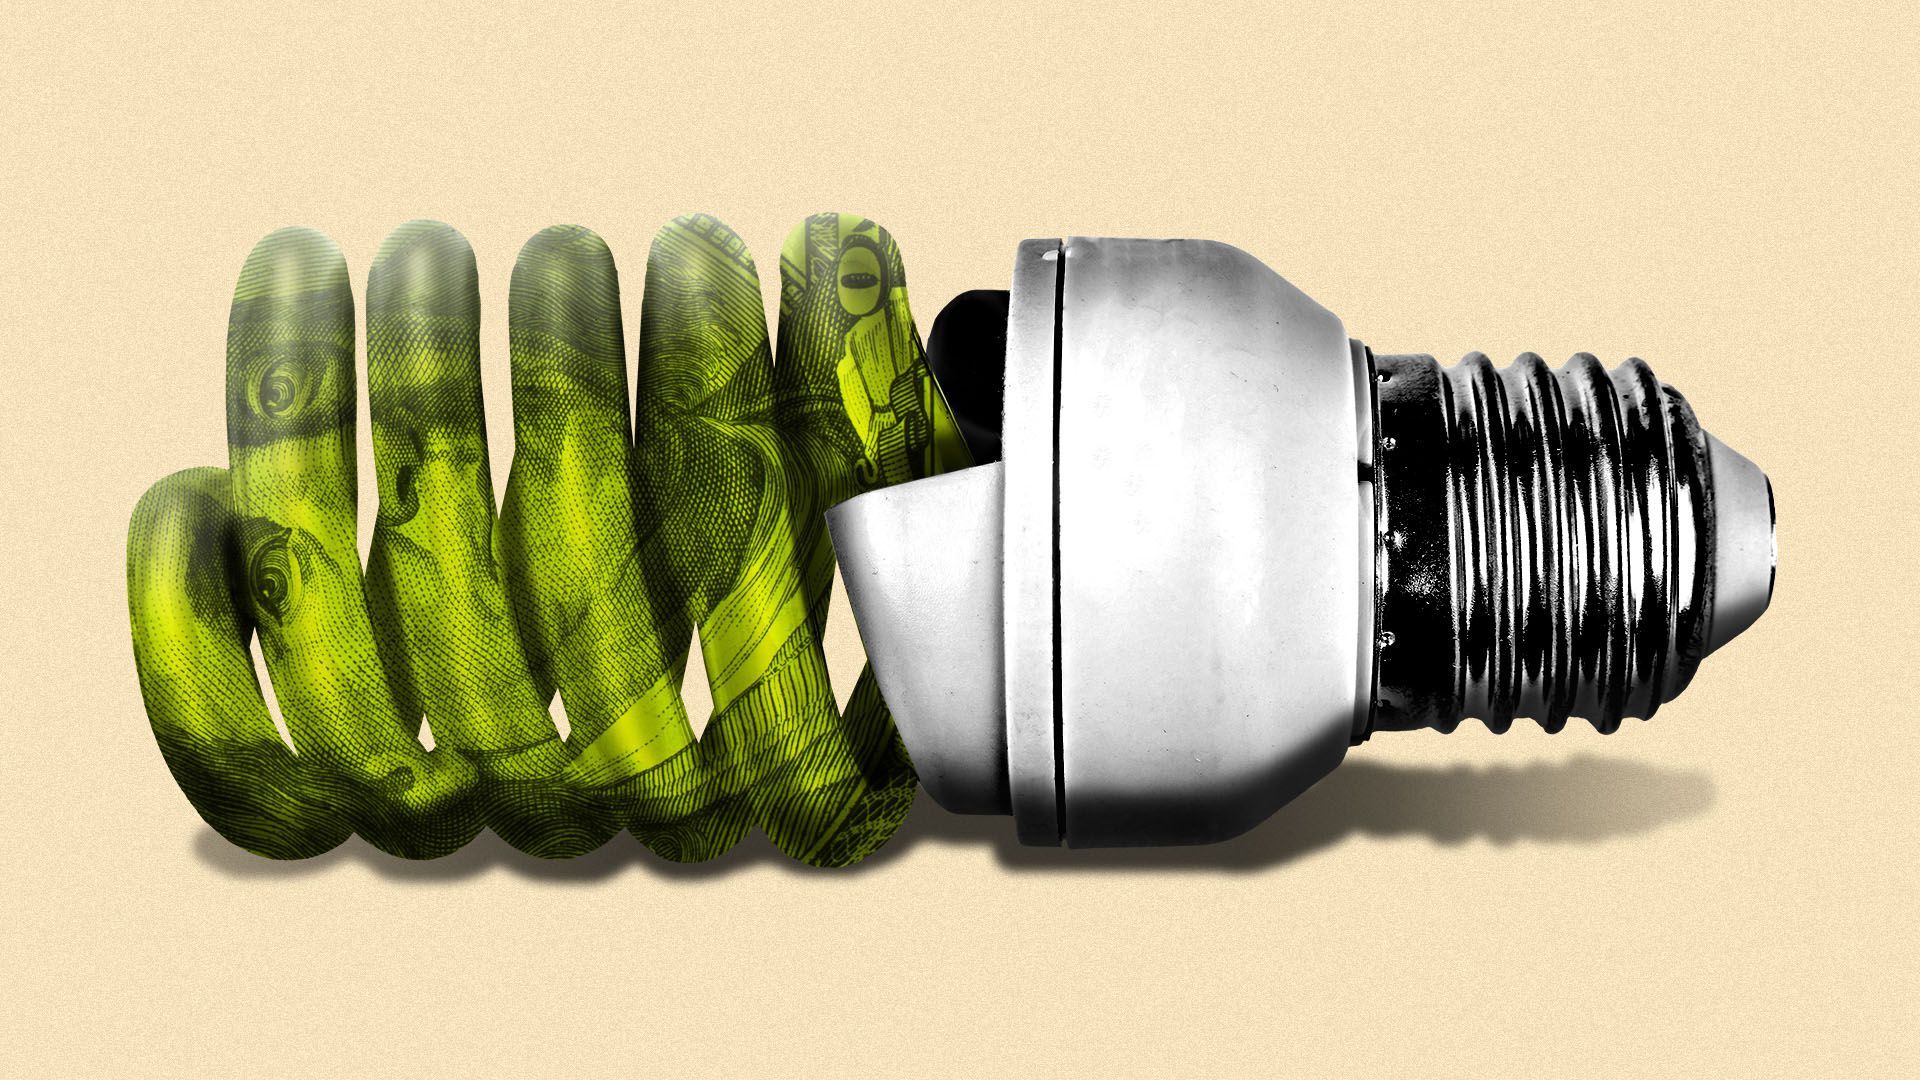 Illustration of a CFL lightbulb on its side, with a 100 dollar bill overlay